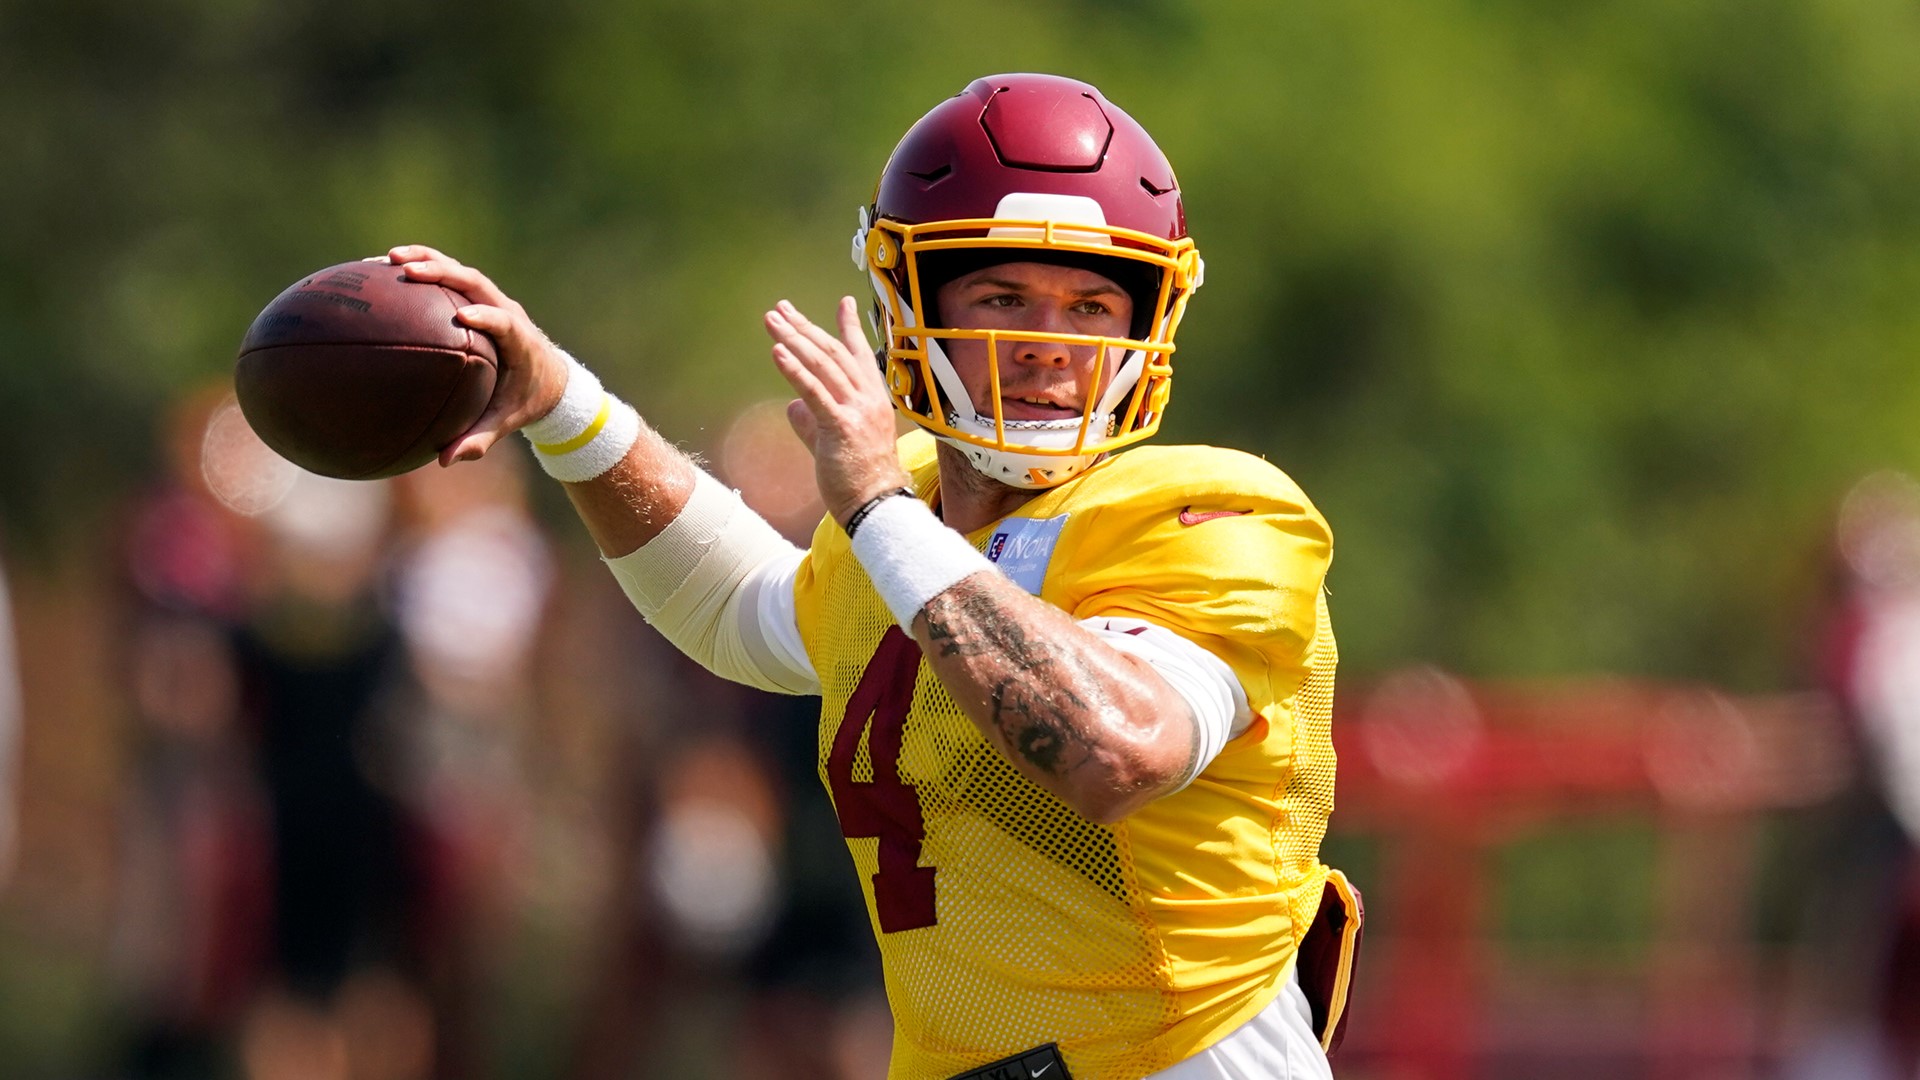 Washington Football Team quarterback Taylor Heinicke recently signed a 2-year contract worth up to $8.75 million.